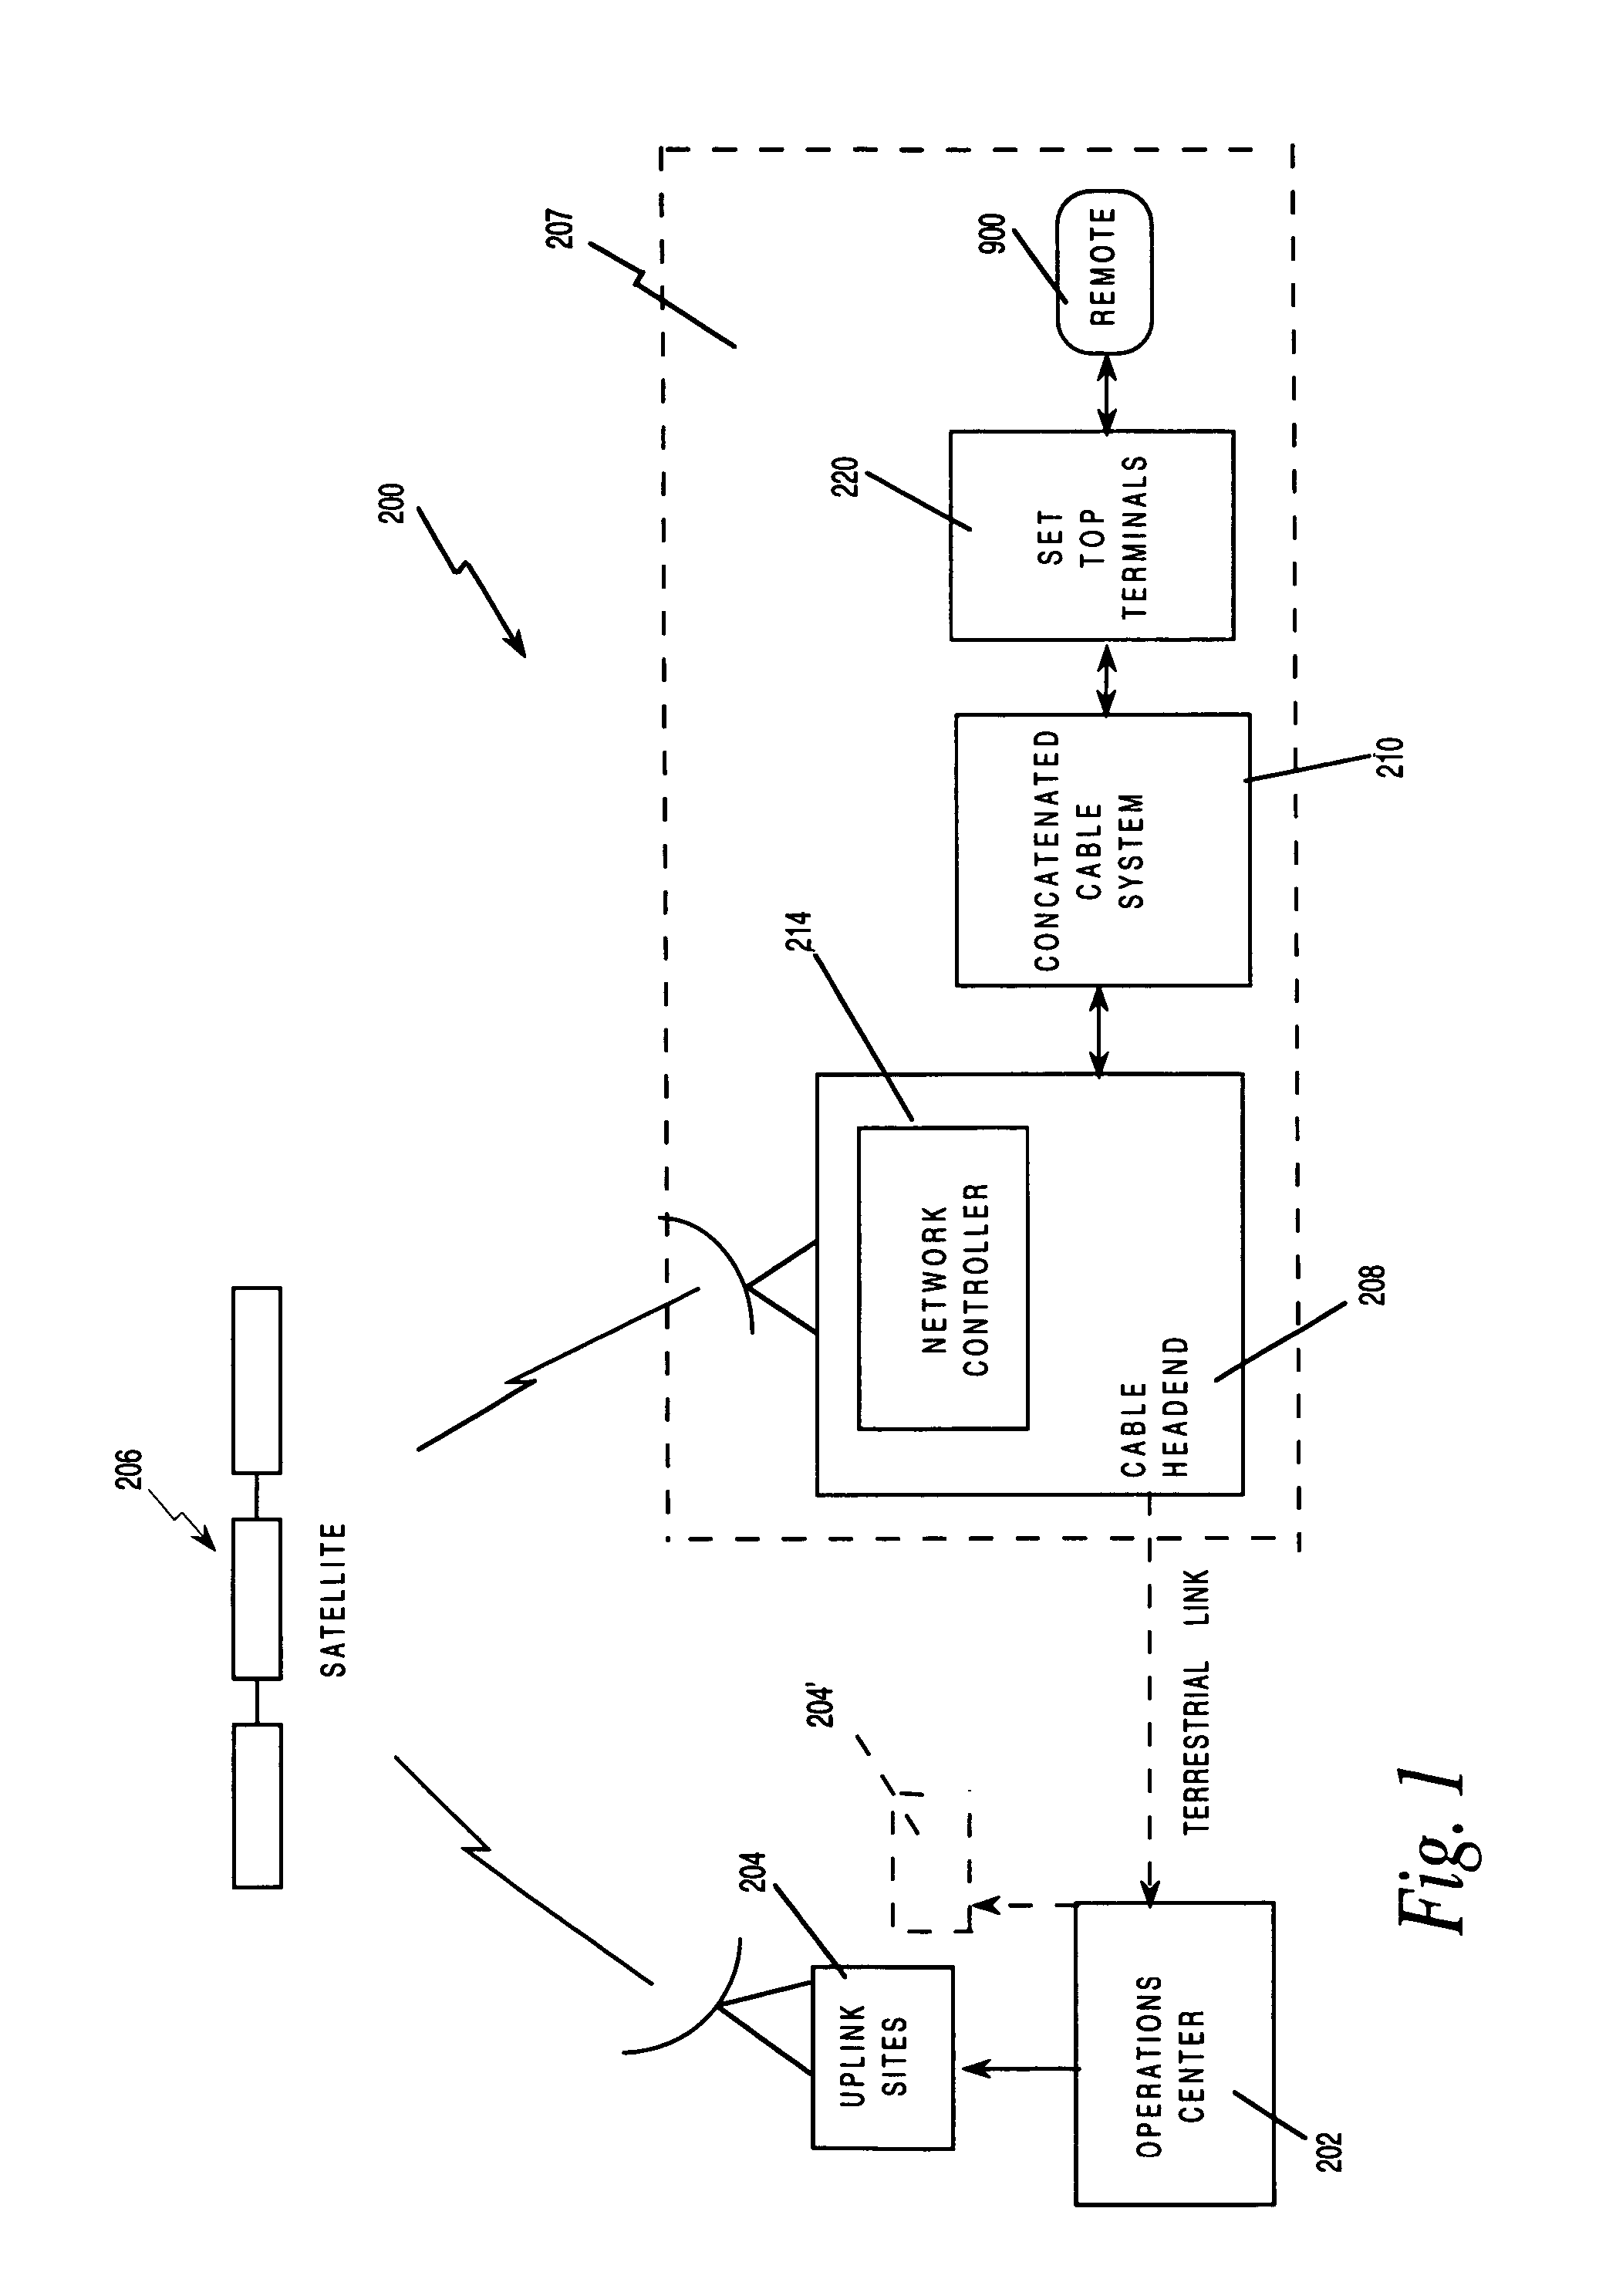 Method and apparatus for interactive program suggestion